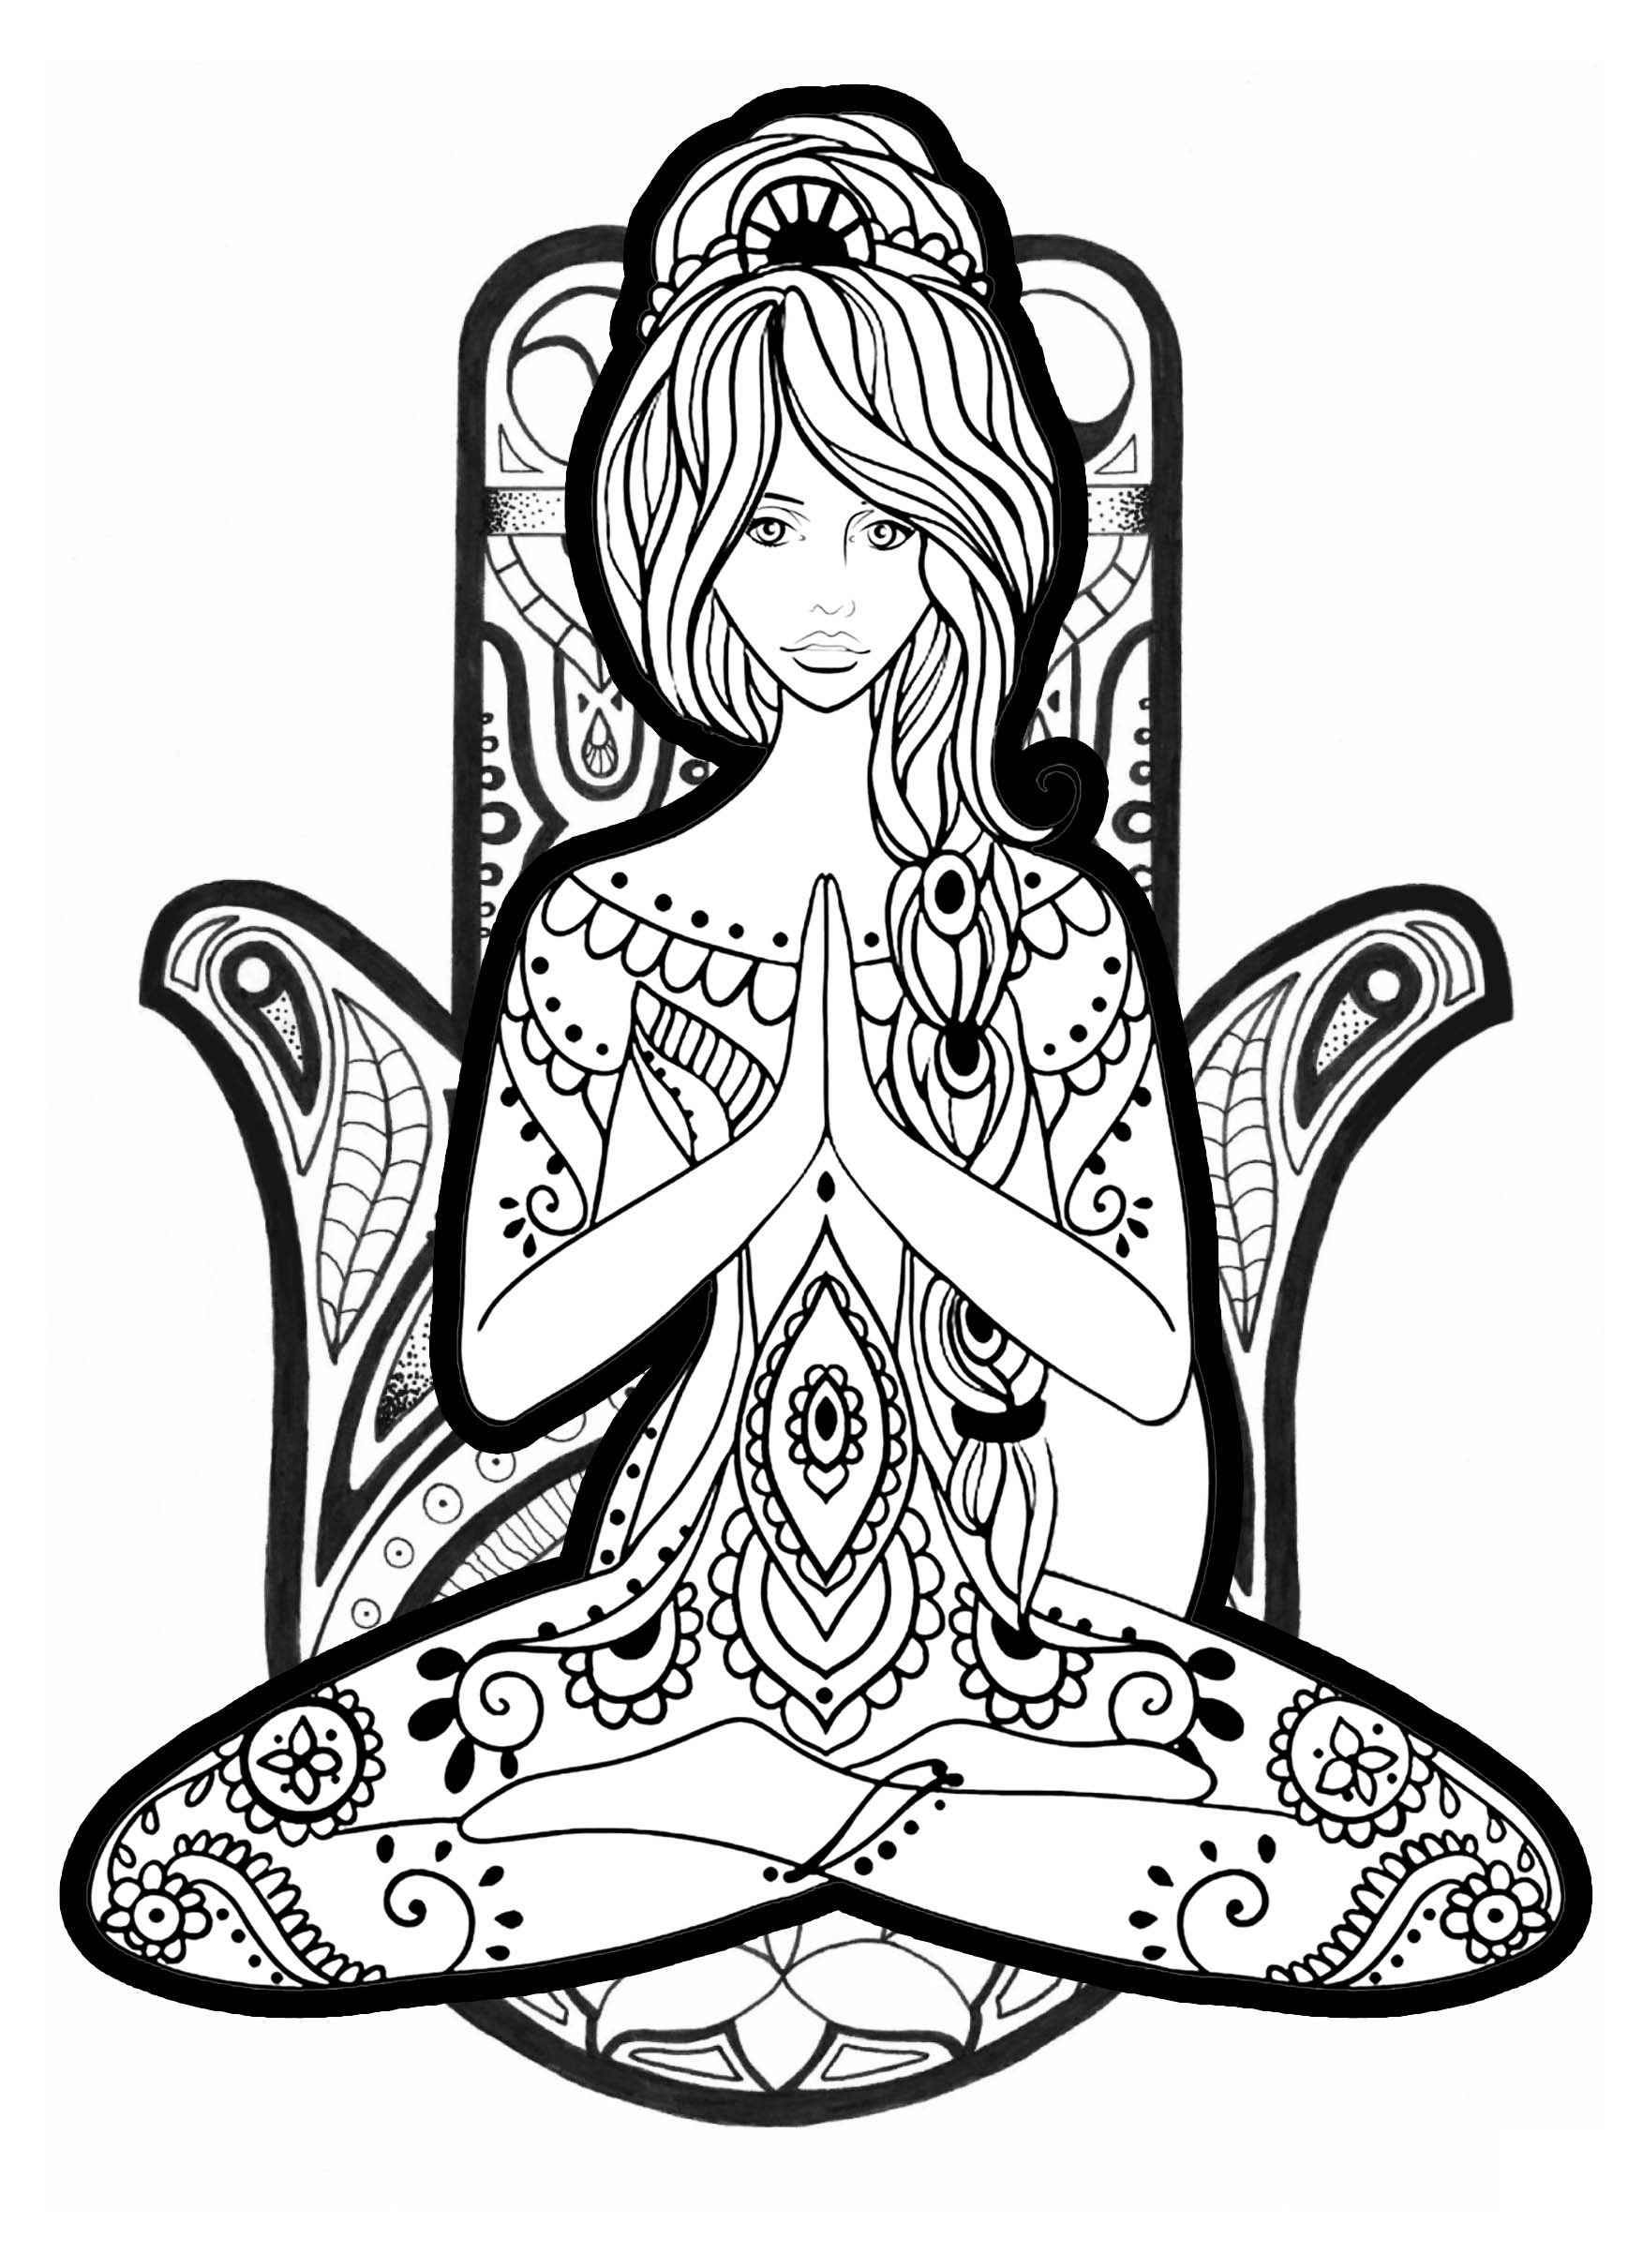 Yoga 2 - Anti stress Adult Coloring Pages